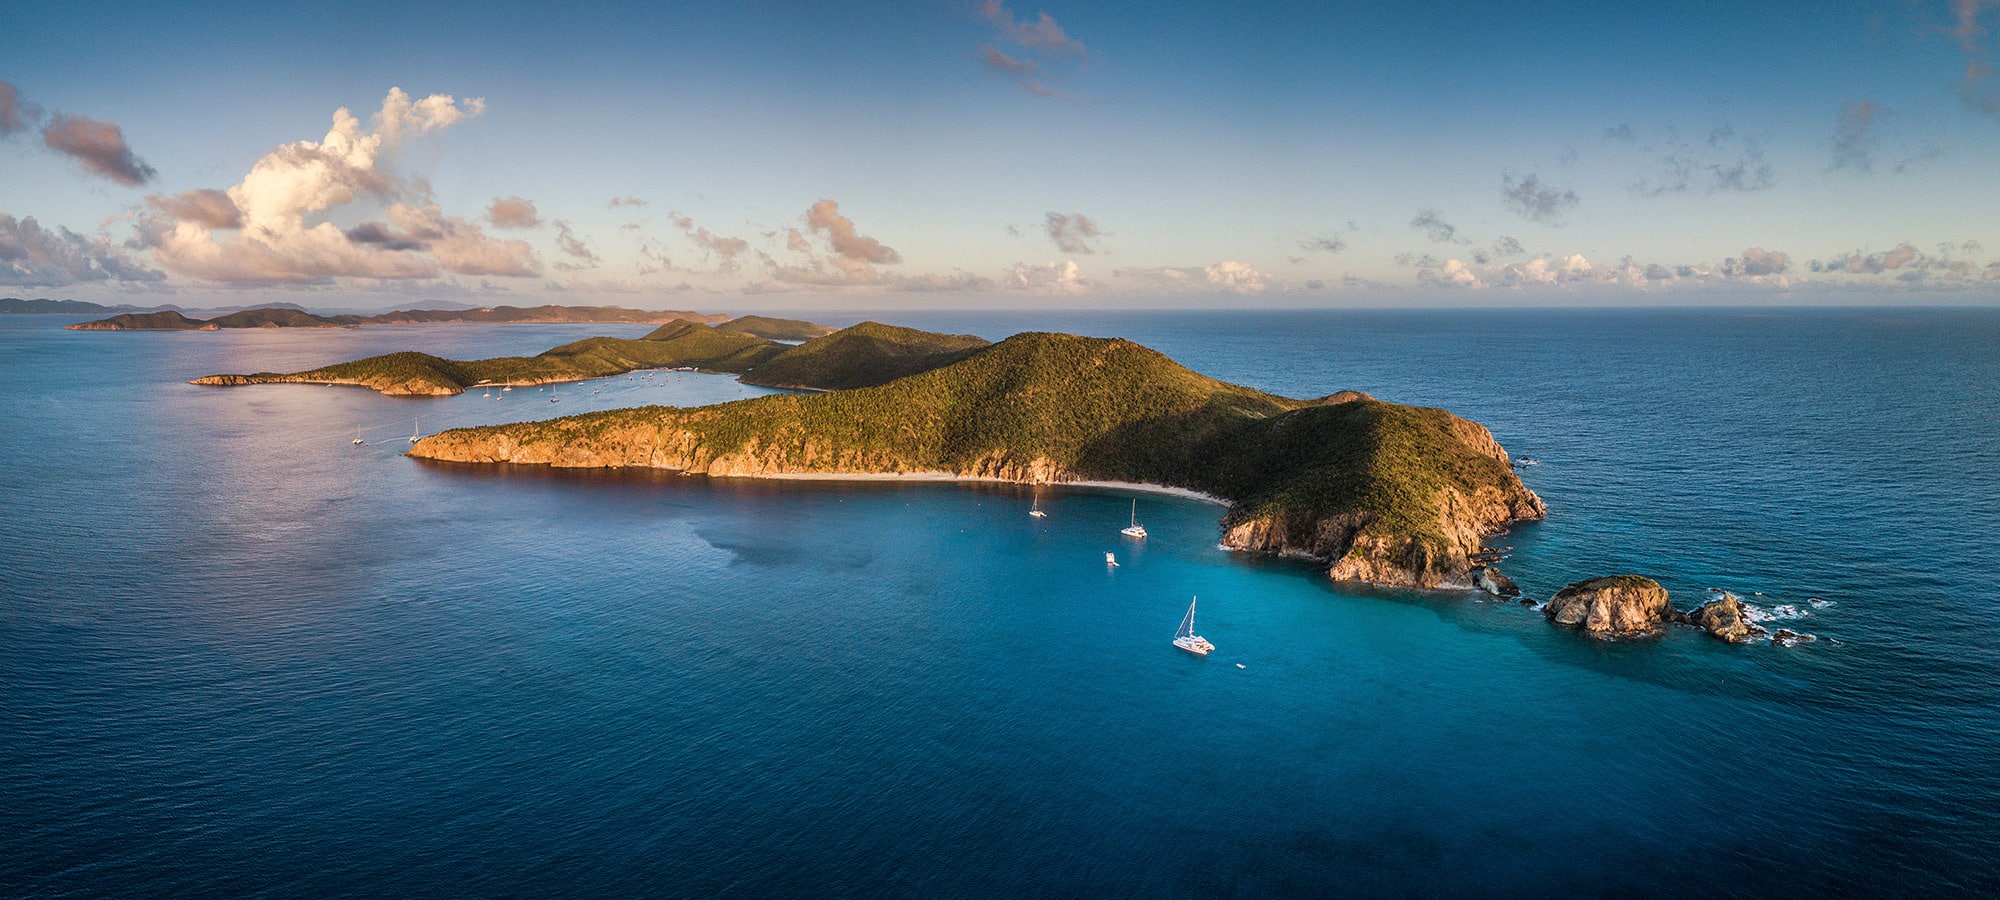 The BVI are coming back strong. Here’s why you should go now.